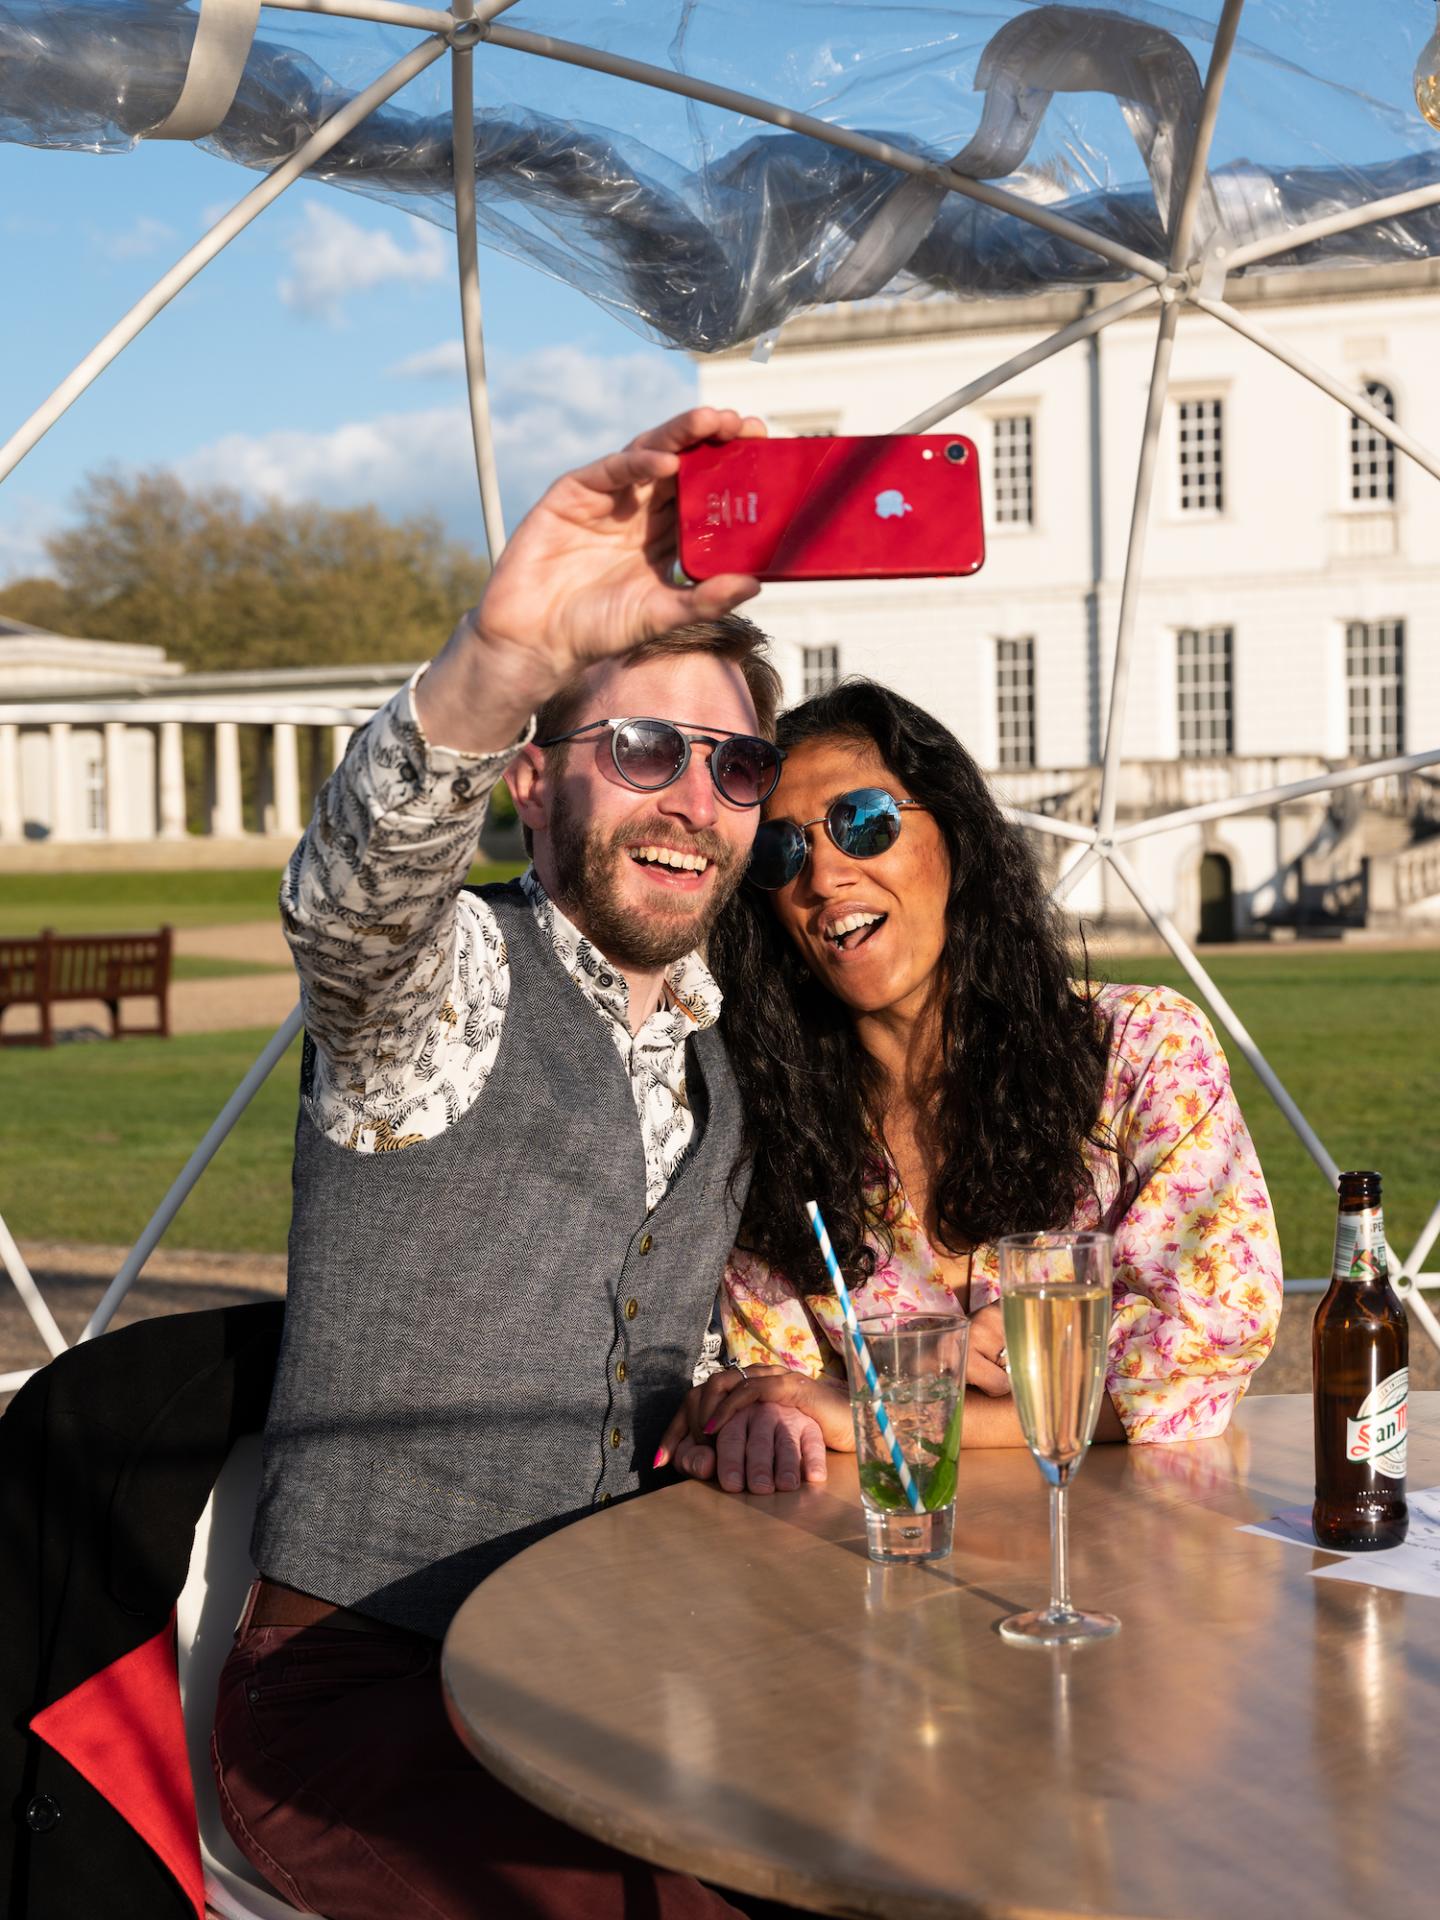 A couple takes a selfie in the Queen's House Dining Domes, with drinks on the table and the Queen's House in the background